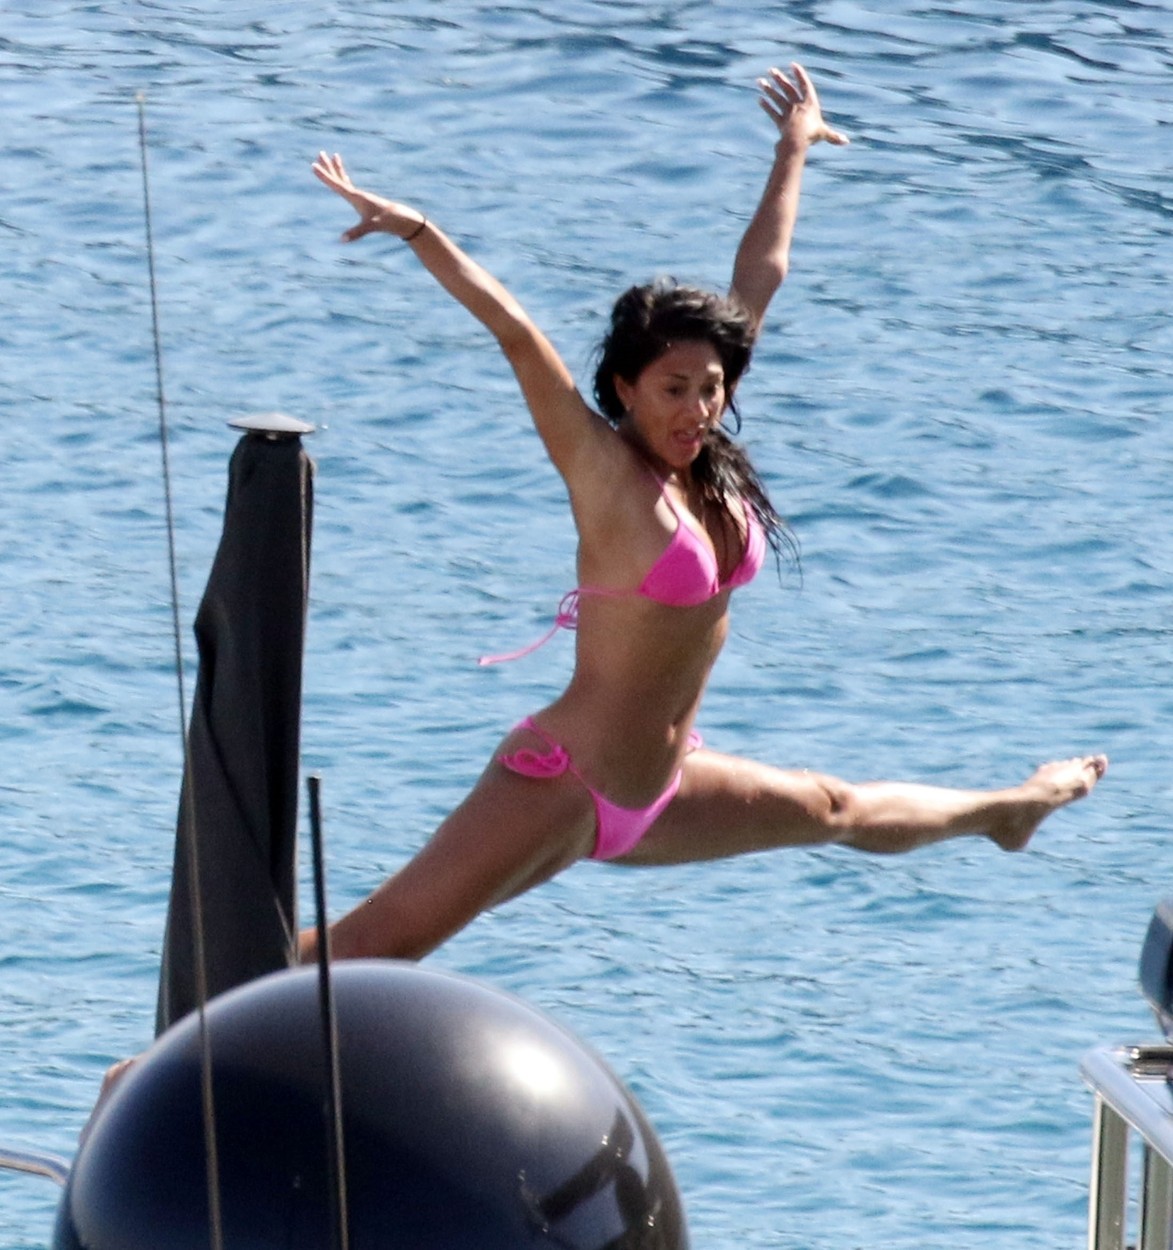 Exclusive Singer And X Factor Judge Nicole Scherzinger Pictured Looking Fantastic In A Pink